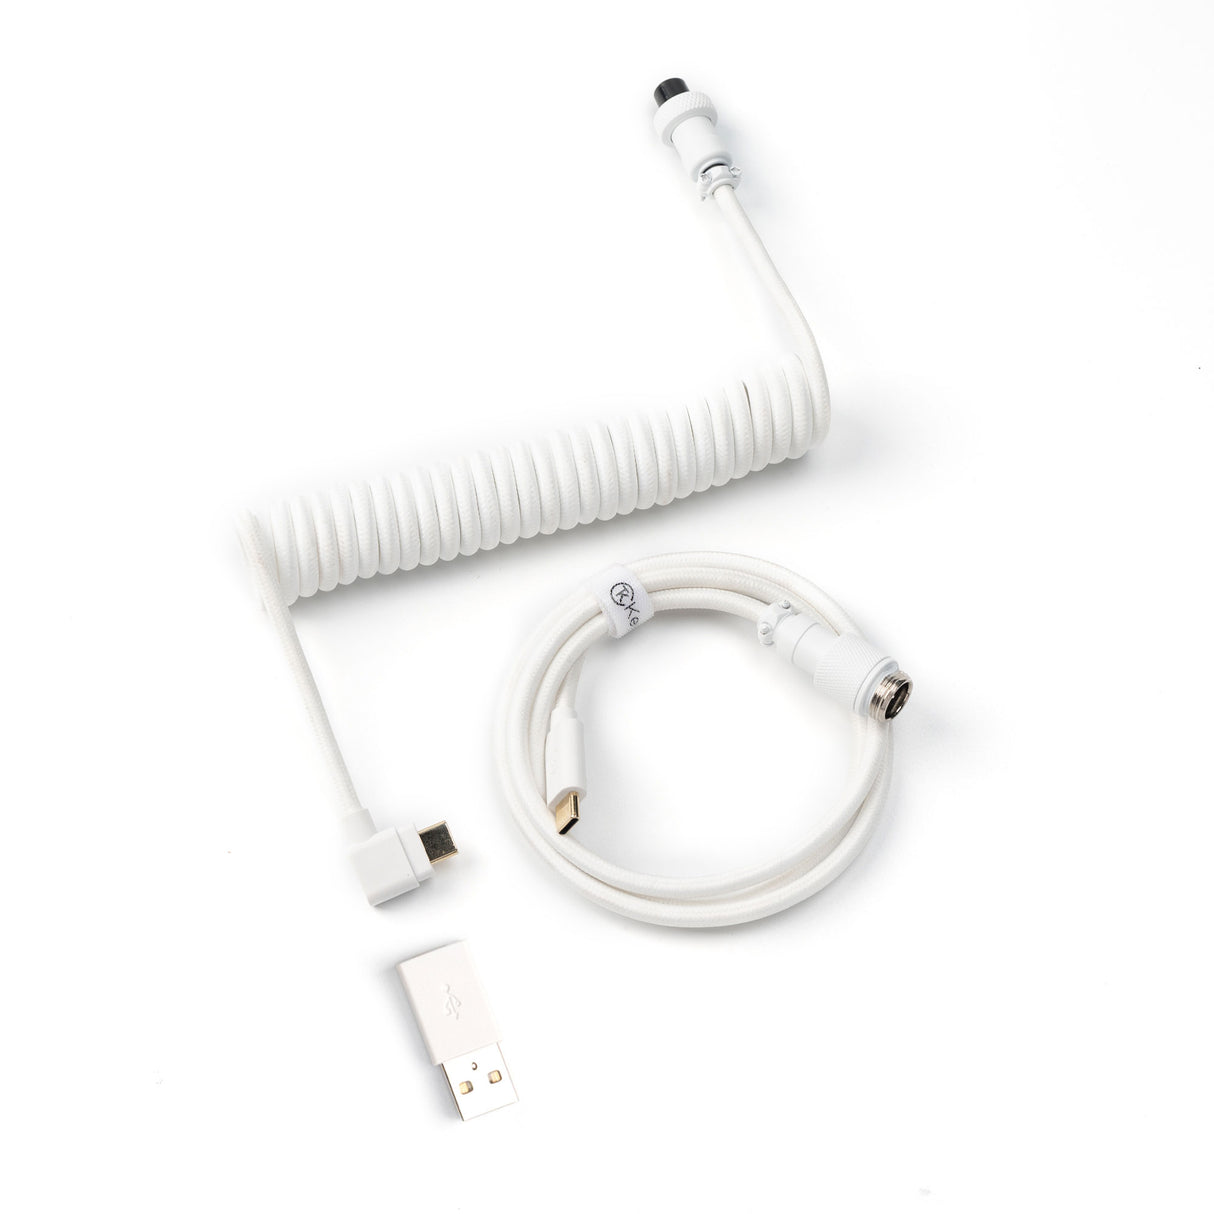 Keychron custom coiled aviator USB type-C cable white color with angled connector